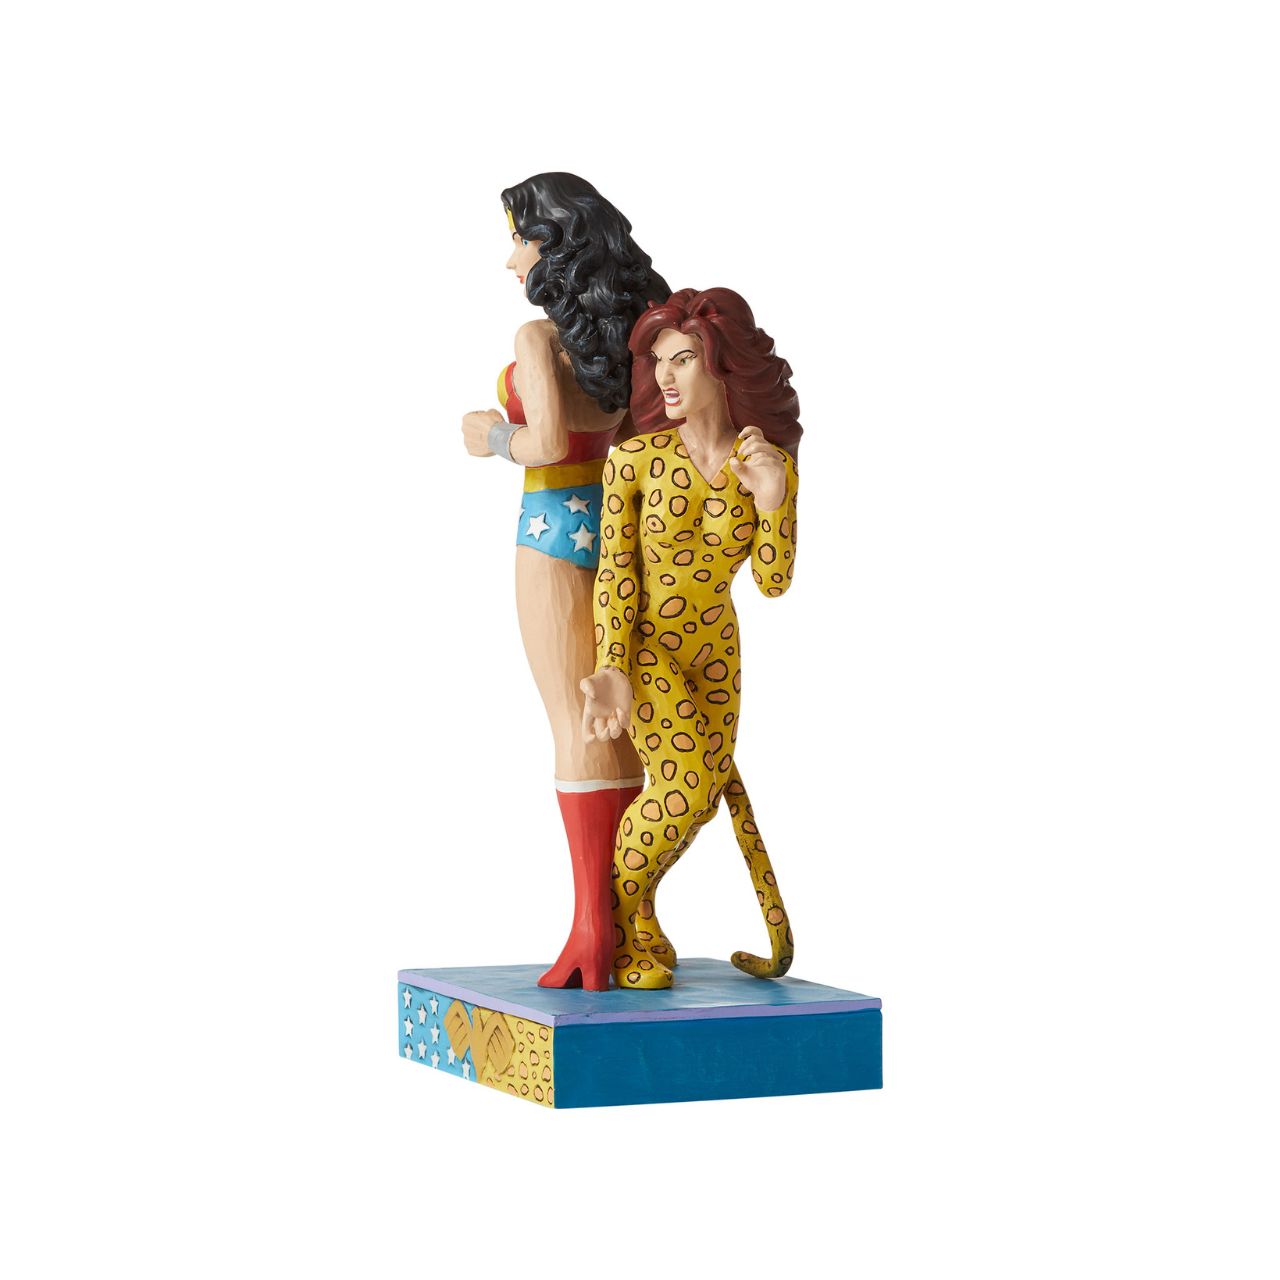 Jim Shore Wonder Woman and Cheetah Figurine  Jim Shore celebrates Wonder Woman and Cheetah back to back in his signature wood carved look and folk art styling. Sure to be a treasured gift across the generations. Unique variations should be expected as this product is hand painted.